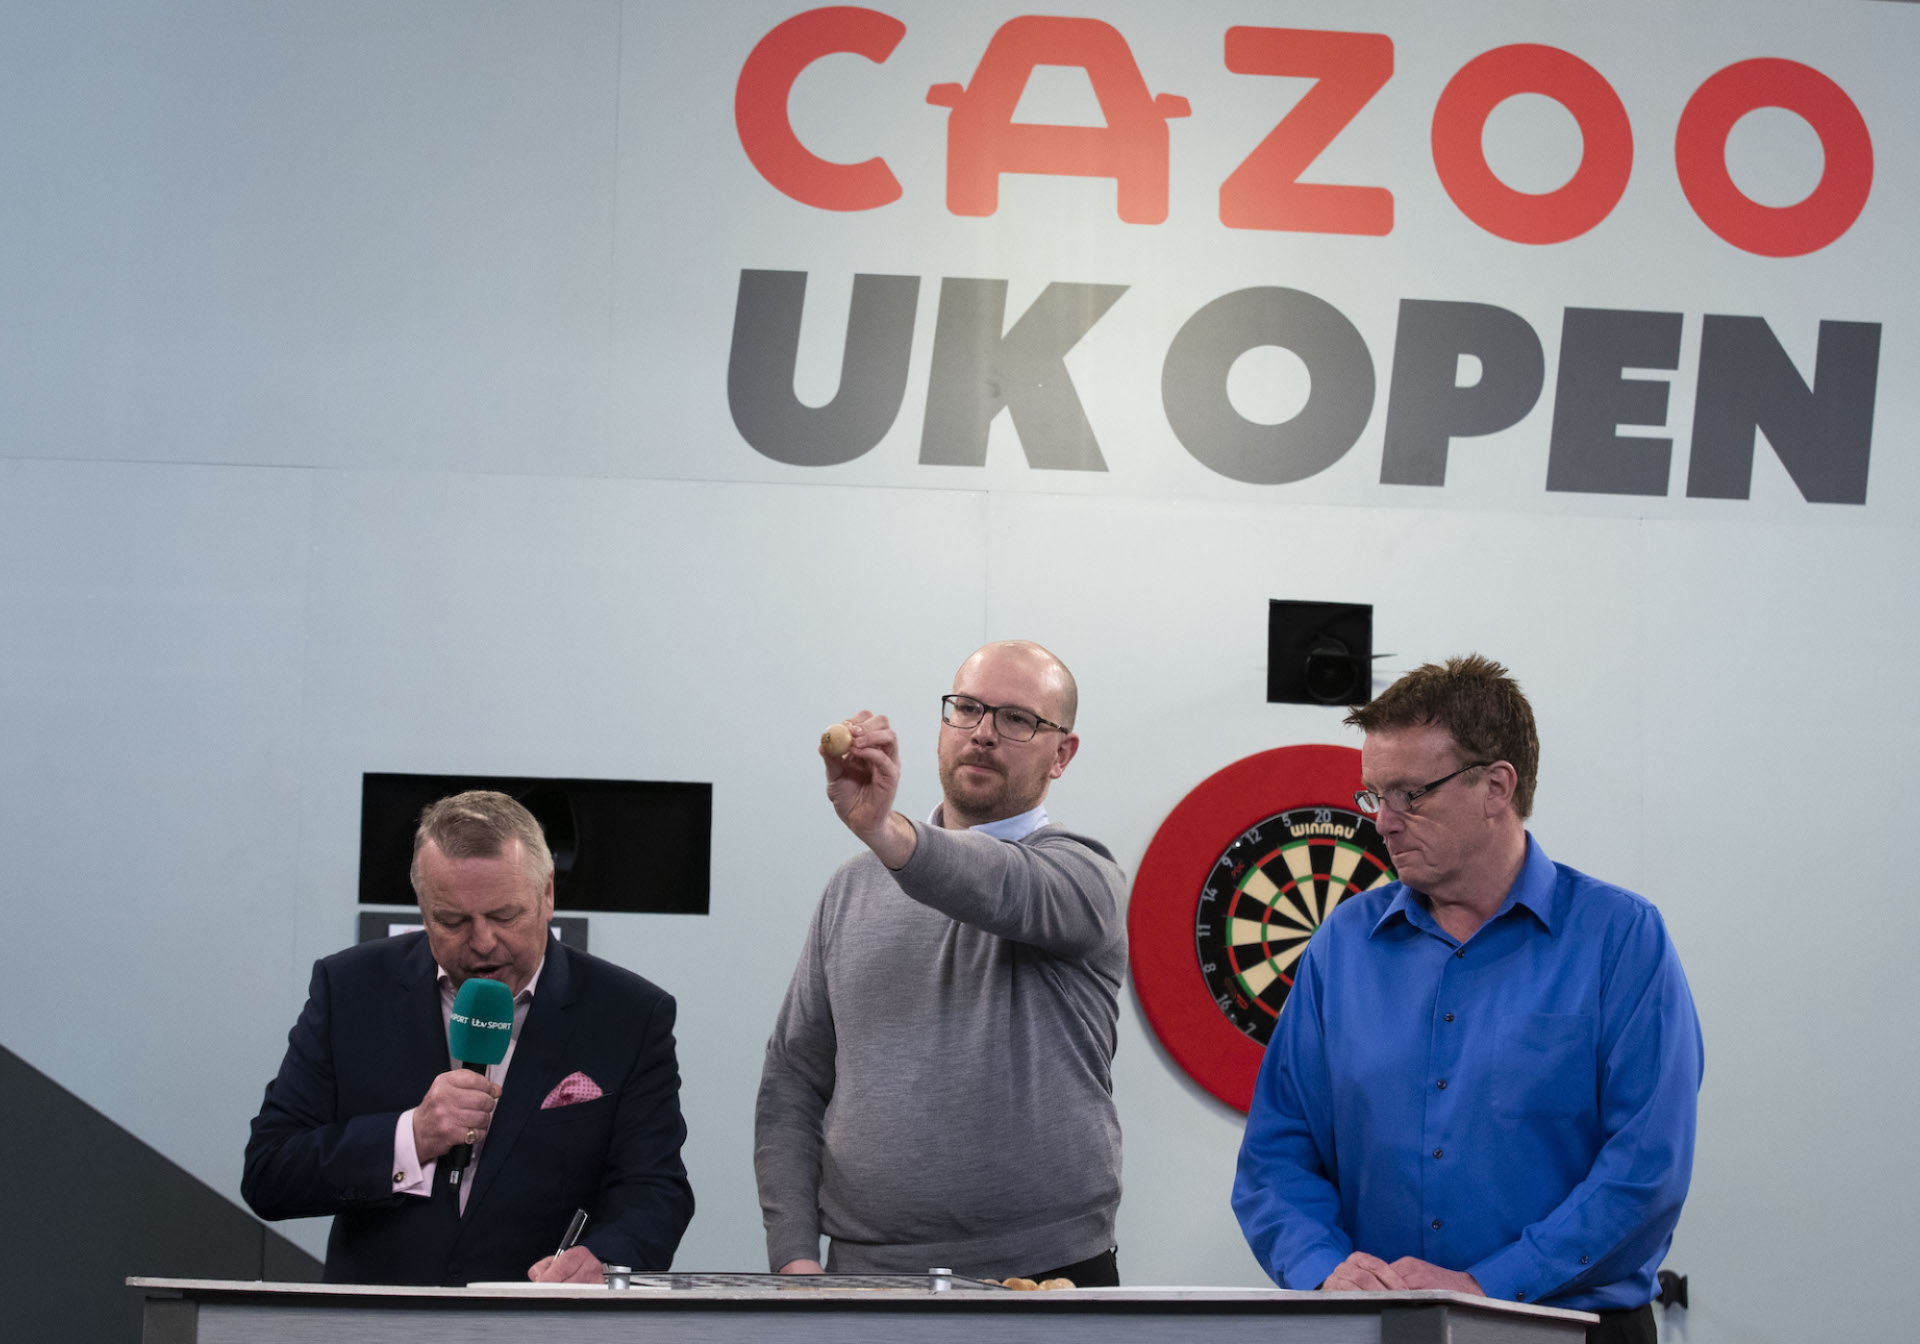 Cazoo UK Open fifth round draw